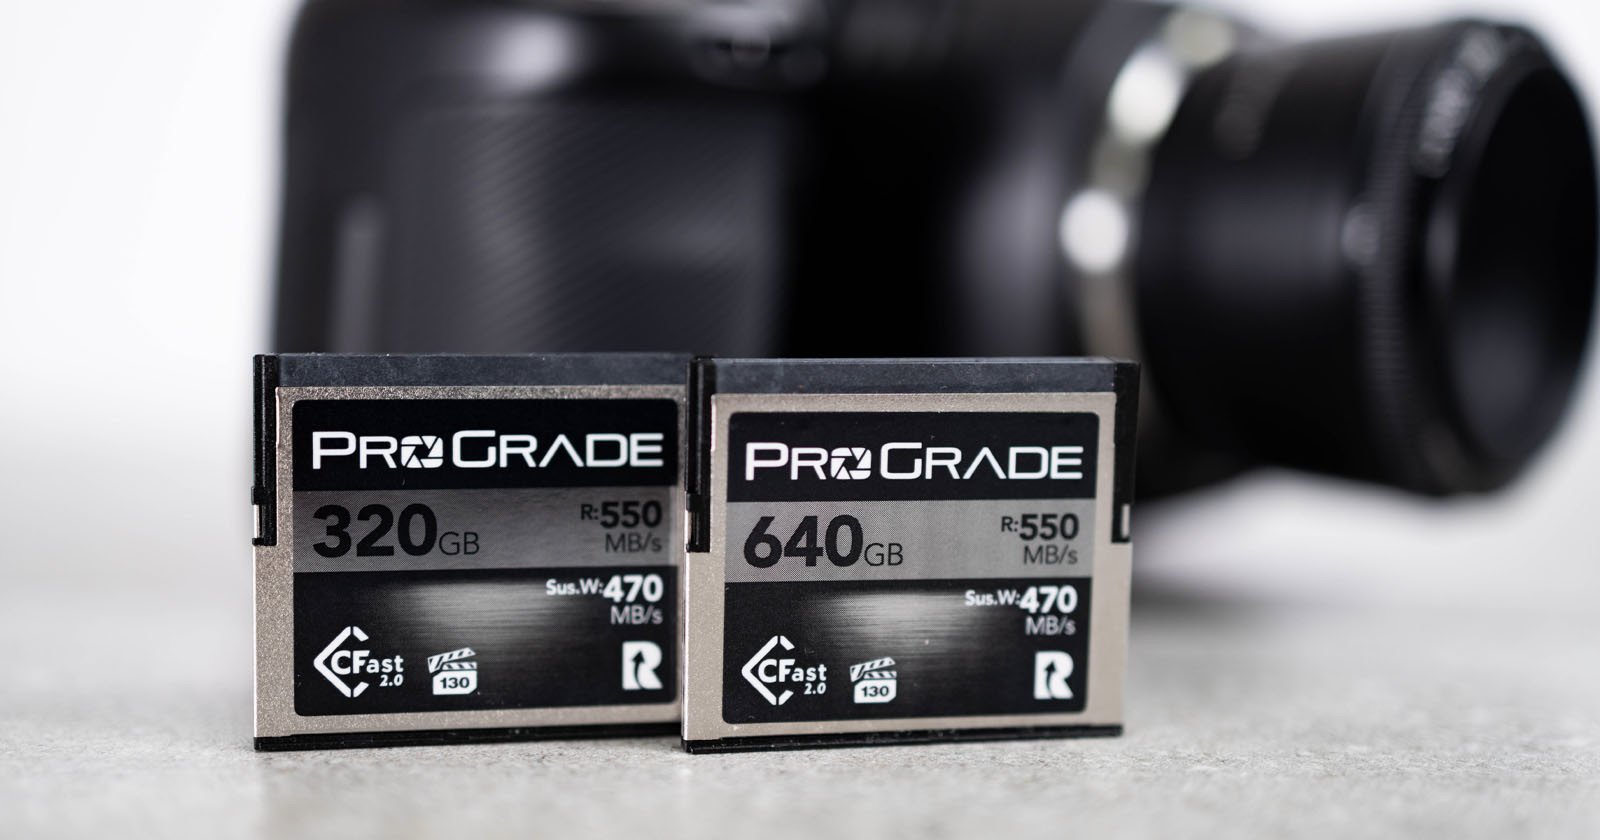  prograde 3rd-gen cfast cards are its fastest ever 